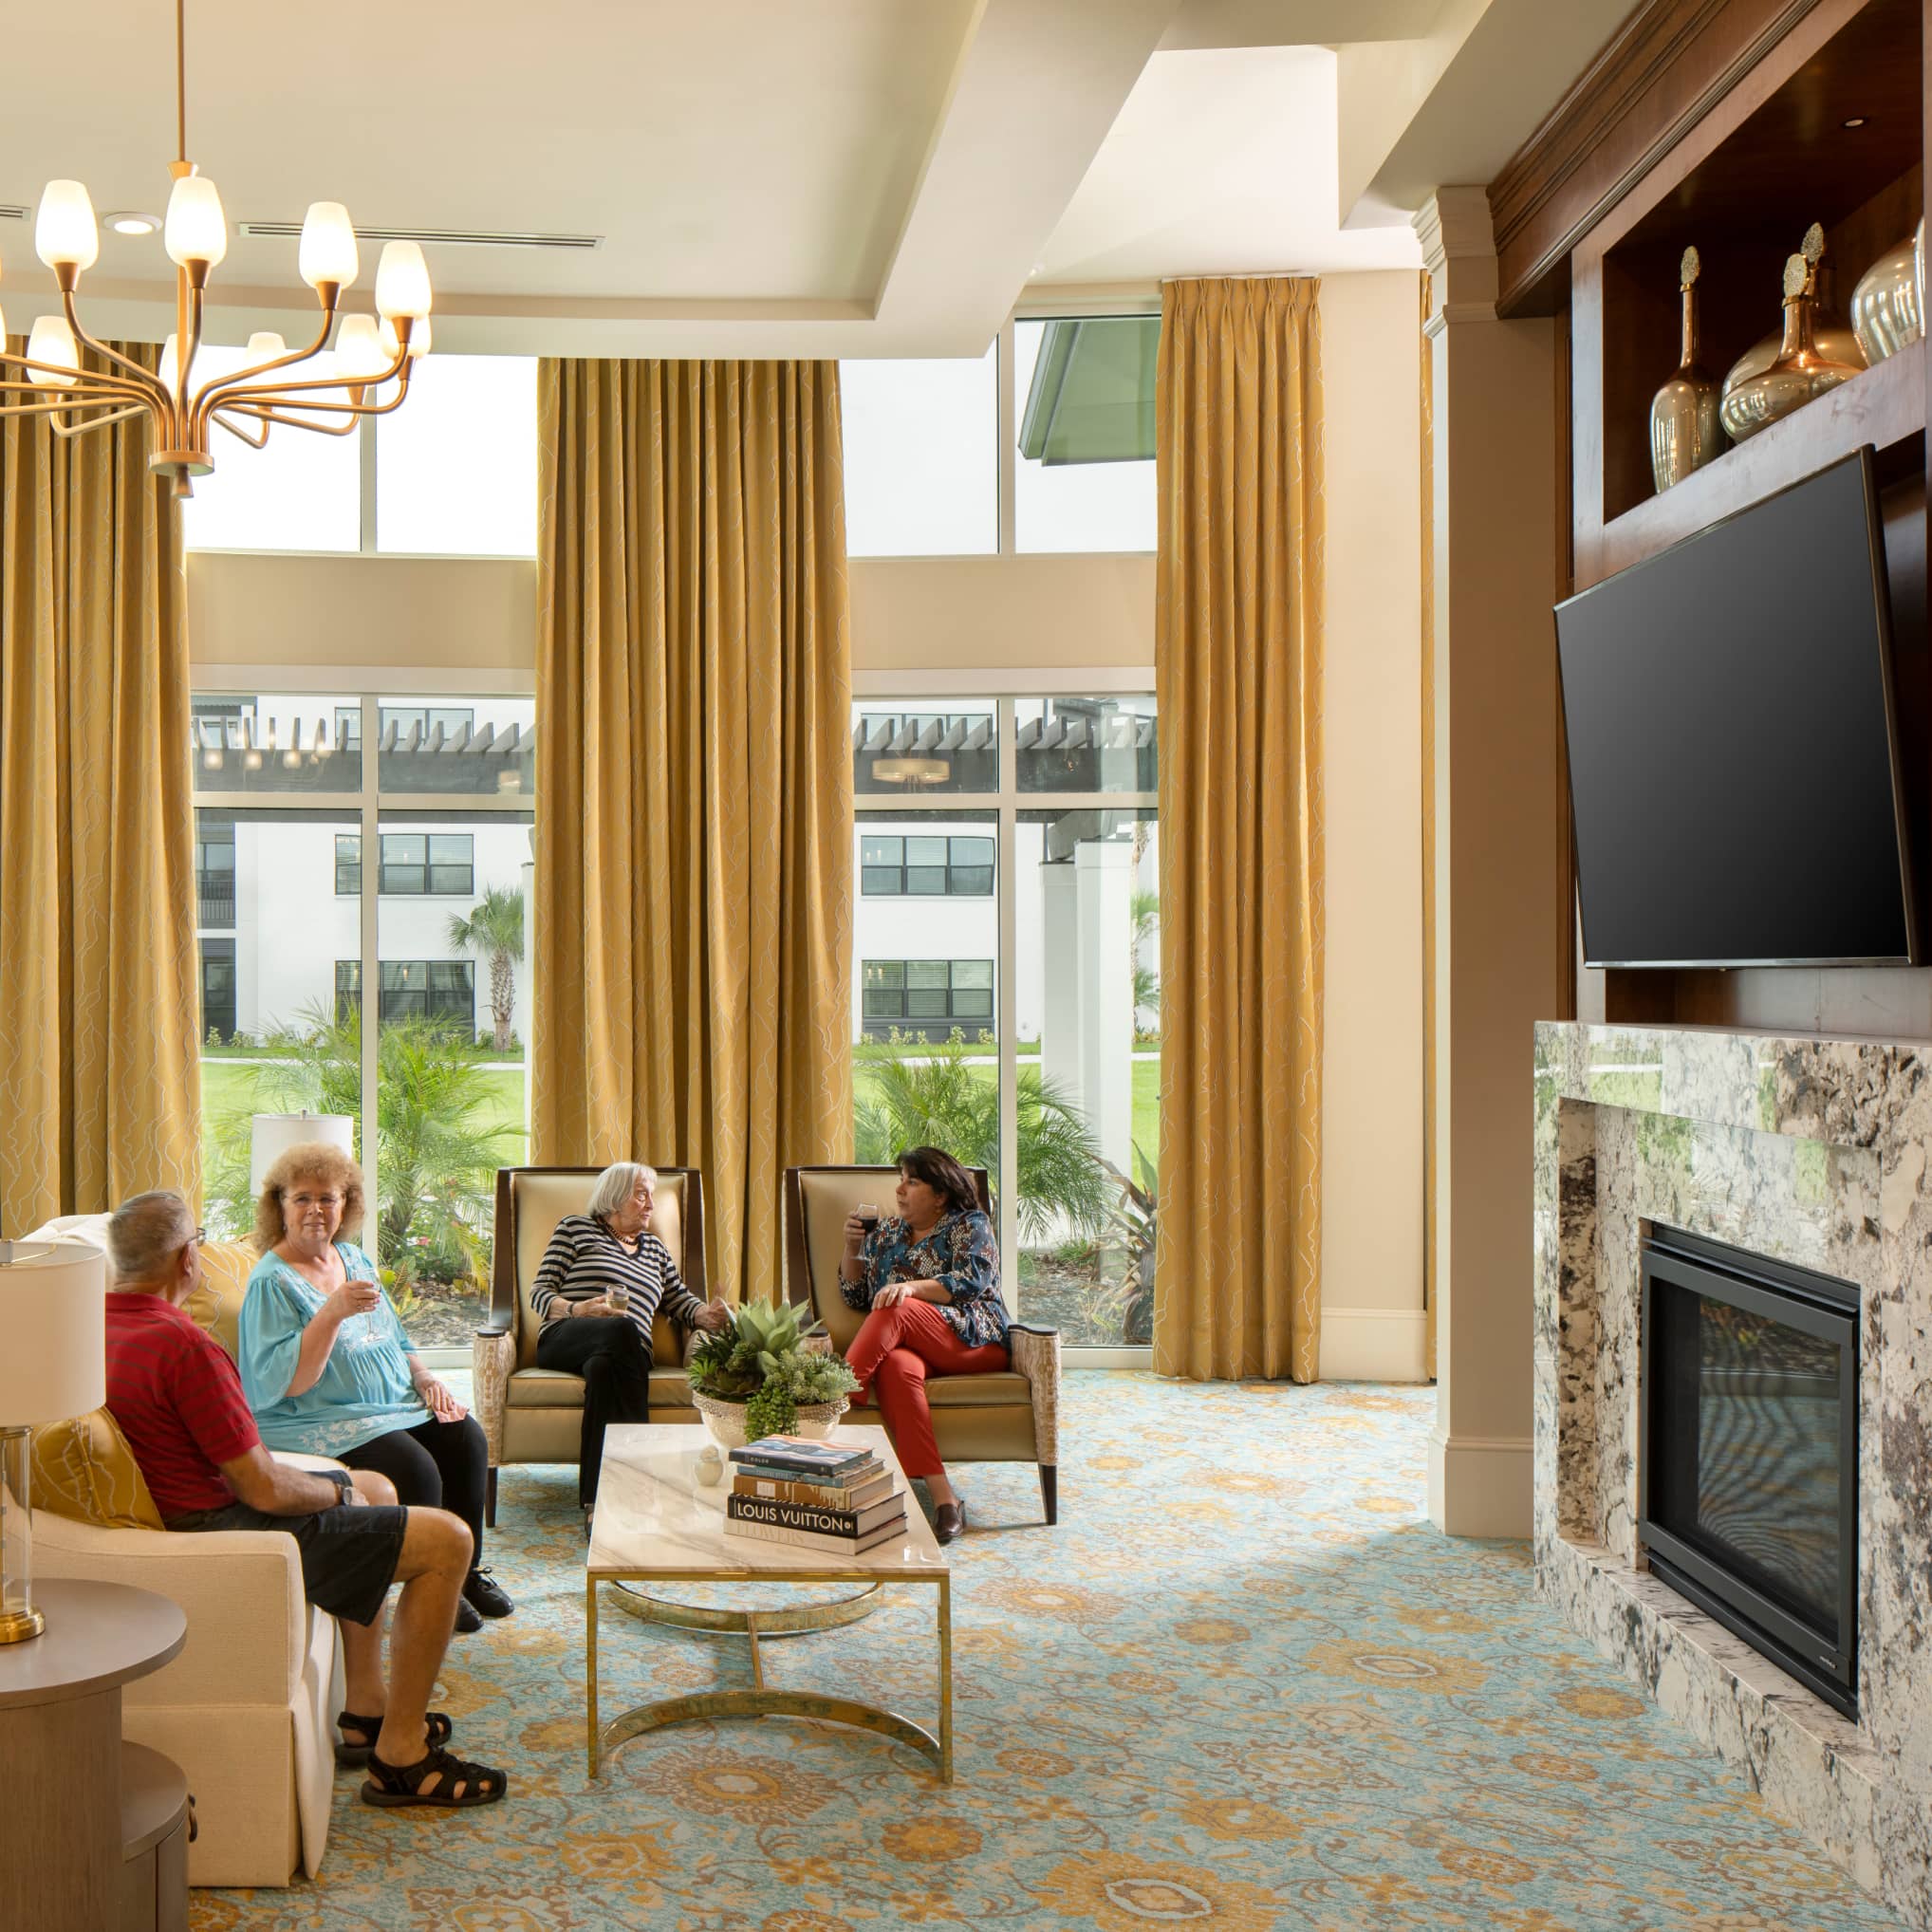 Four Ways Integrated Design and Technology Improve Senior Living Communities